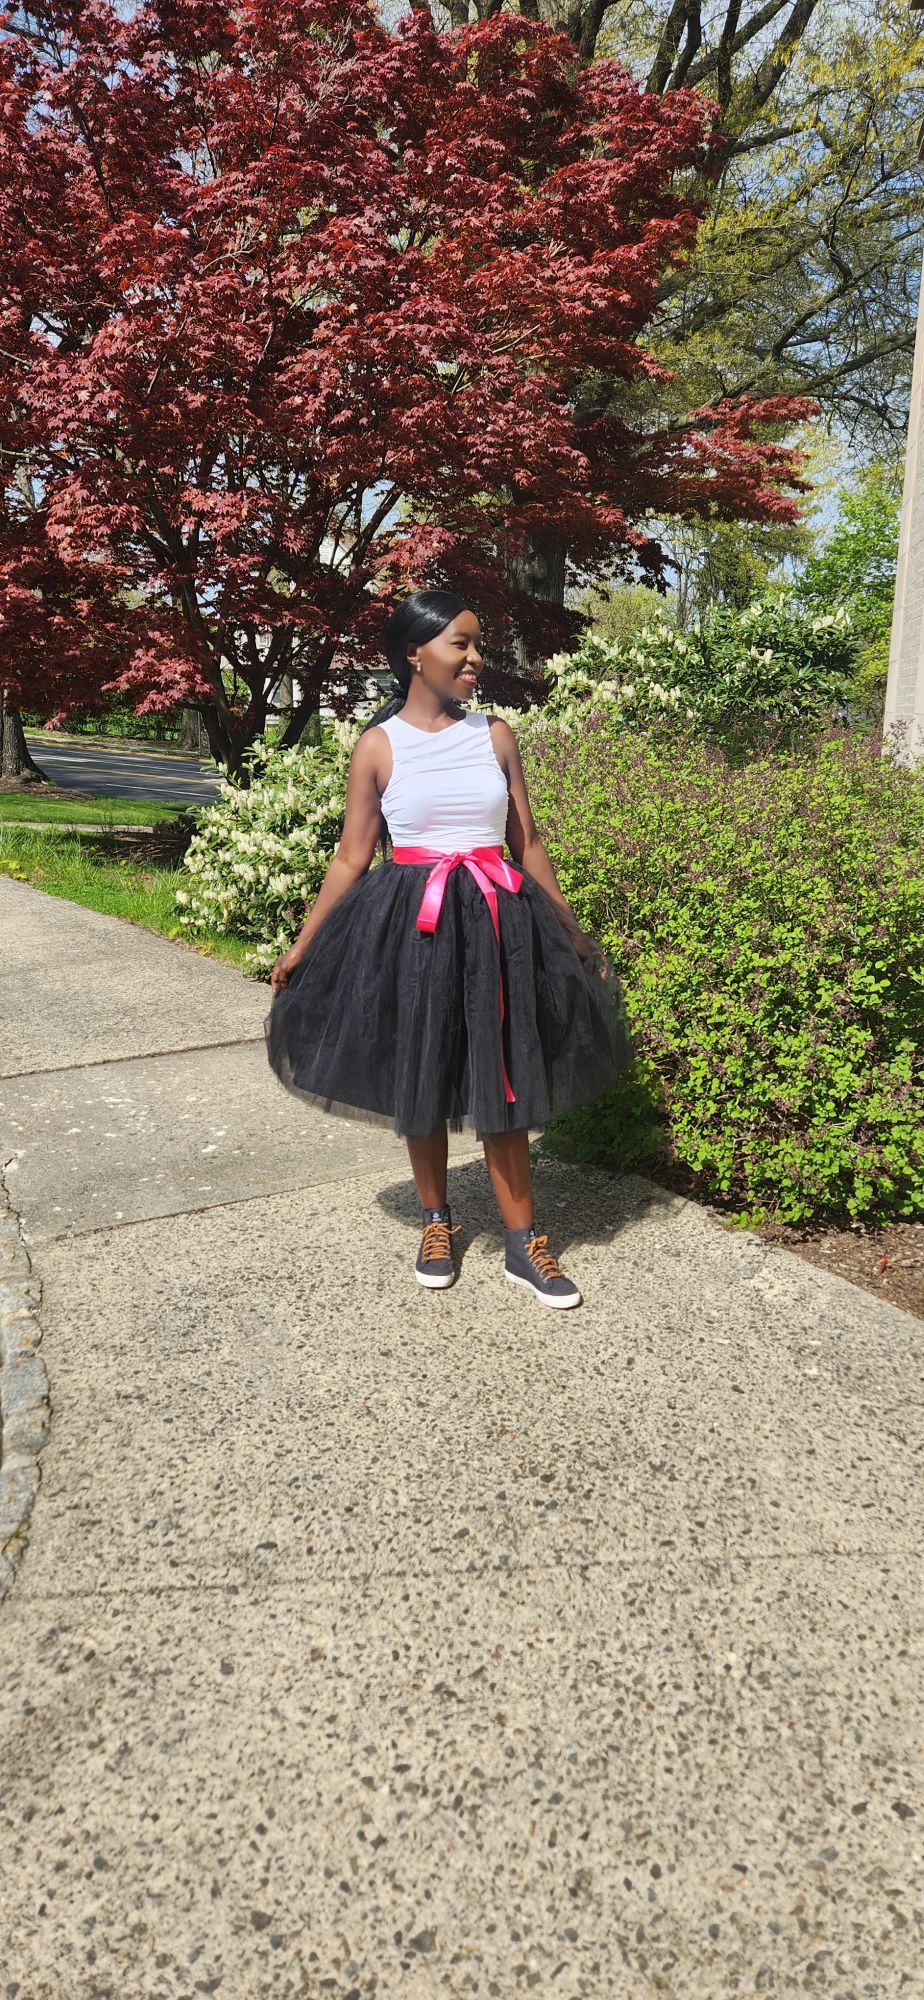 10 reasons why I am obsessed with tulle skirts